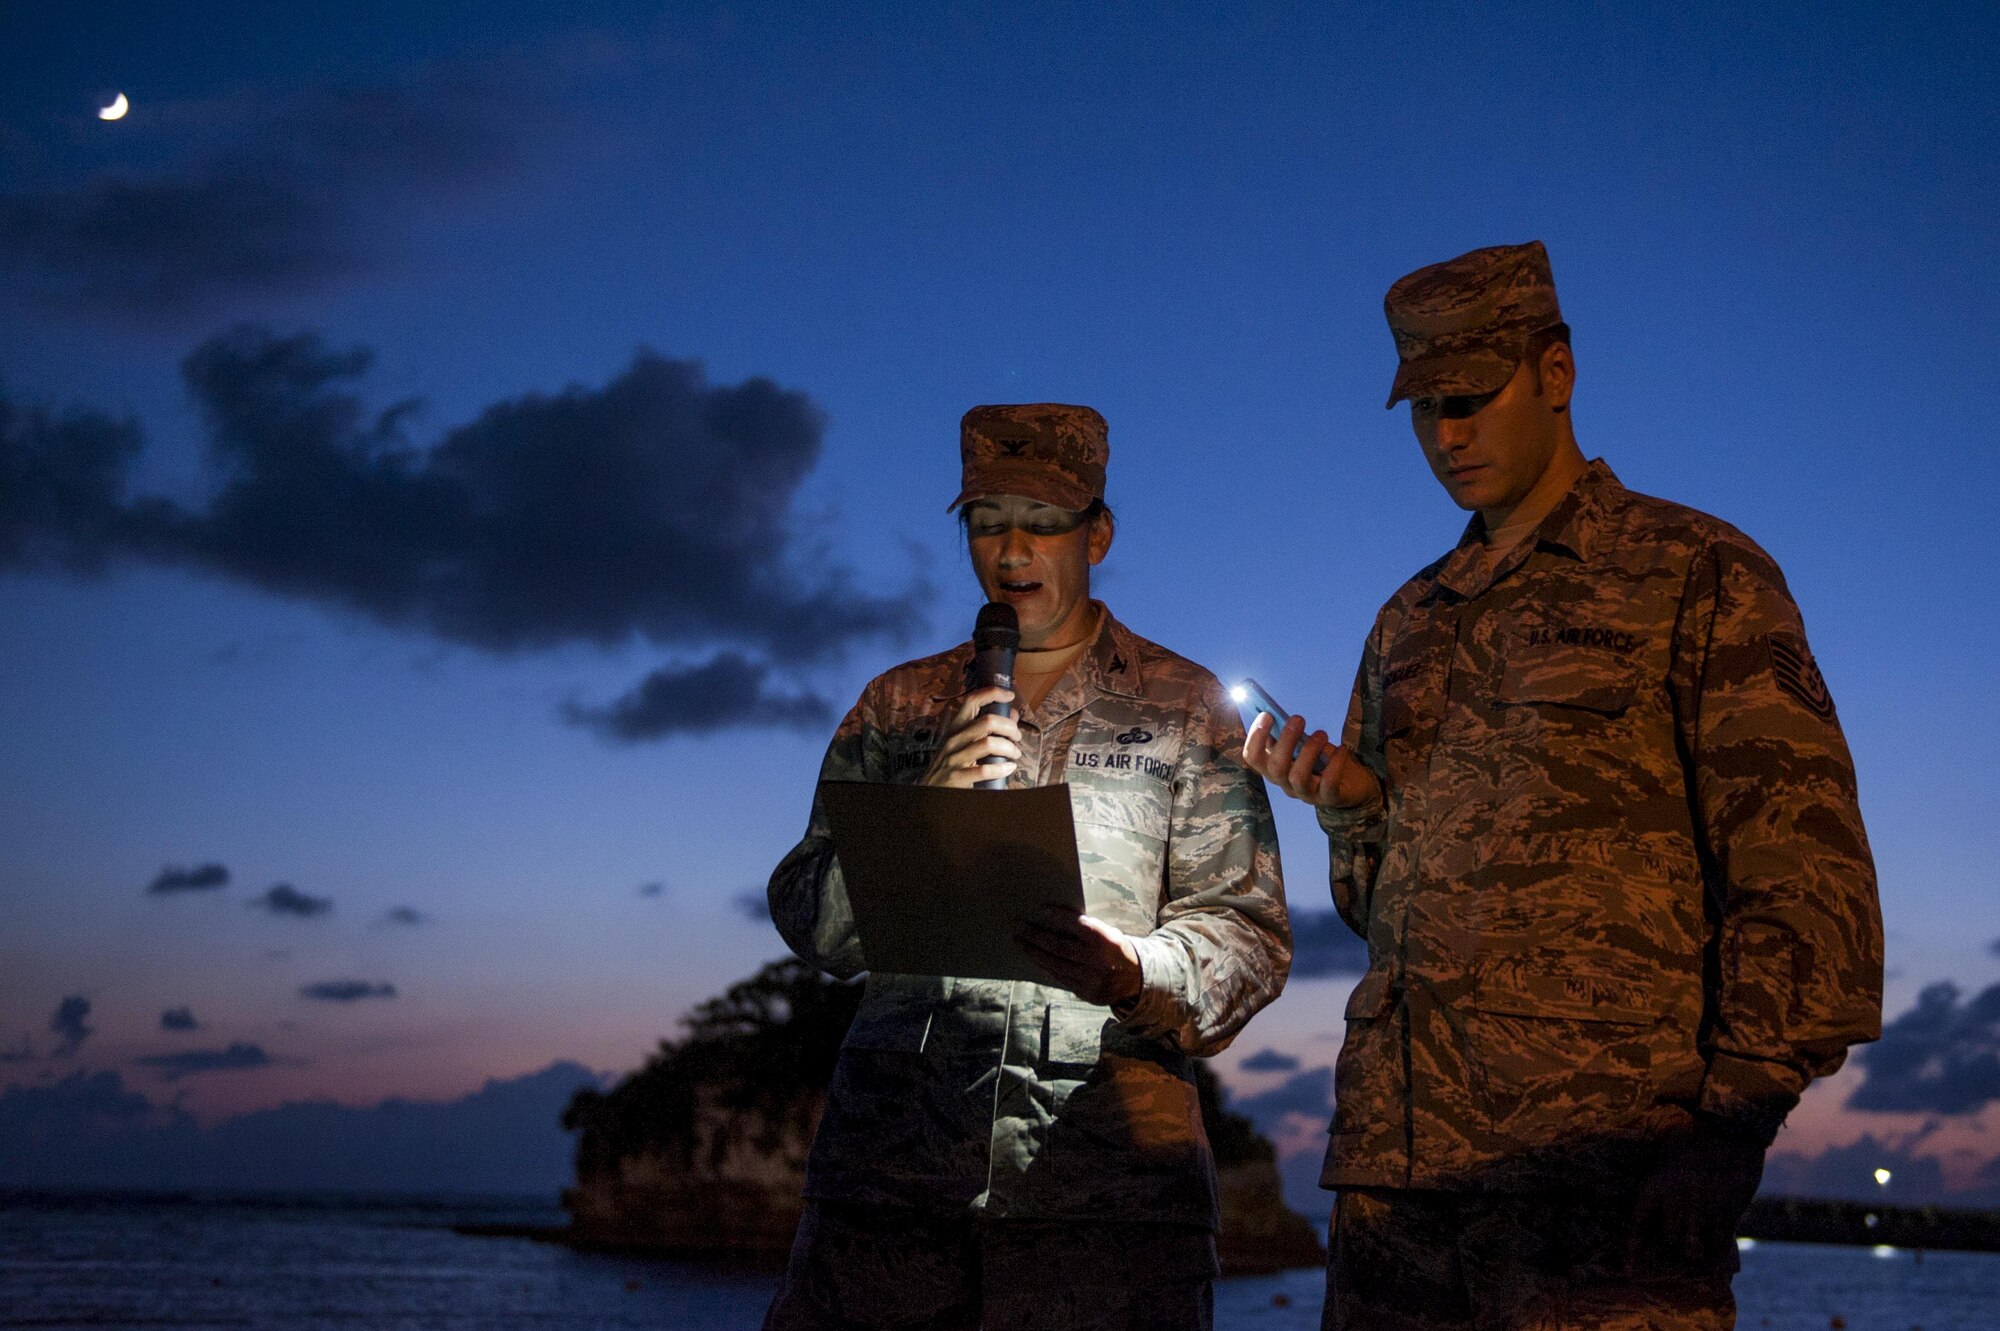 U.S. Air Force Col. Debra Lovette, 18th Mission Support Group commander, speaks while Tech. Sgt. Ezequiel Rodriguez, 18th Operations Support Squadron NCO in charge of airfield management, holds a light for her during the POW/MIA Sky Lantern Ceremony Sept. 17, 2015, at the Kadena Marina, Kadena Air Base, Japan. The sky lantern ceremony was held to honor POWs and MIAs. This particular ceremony was the first of its kind for Kadena. (U.S. Air Force photo by Airman 1st Class Lynette M. Rolen/Released)